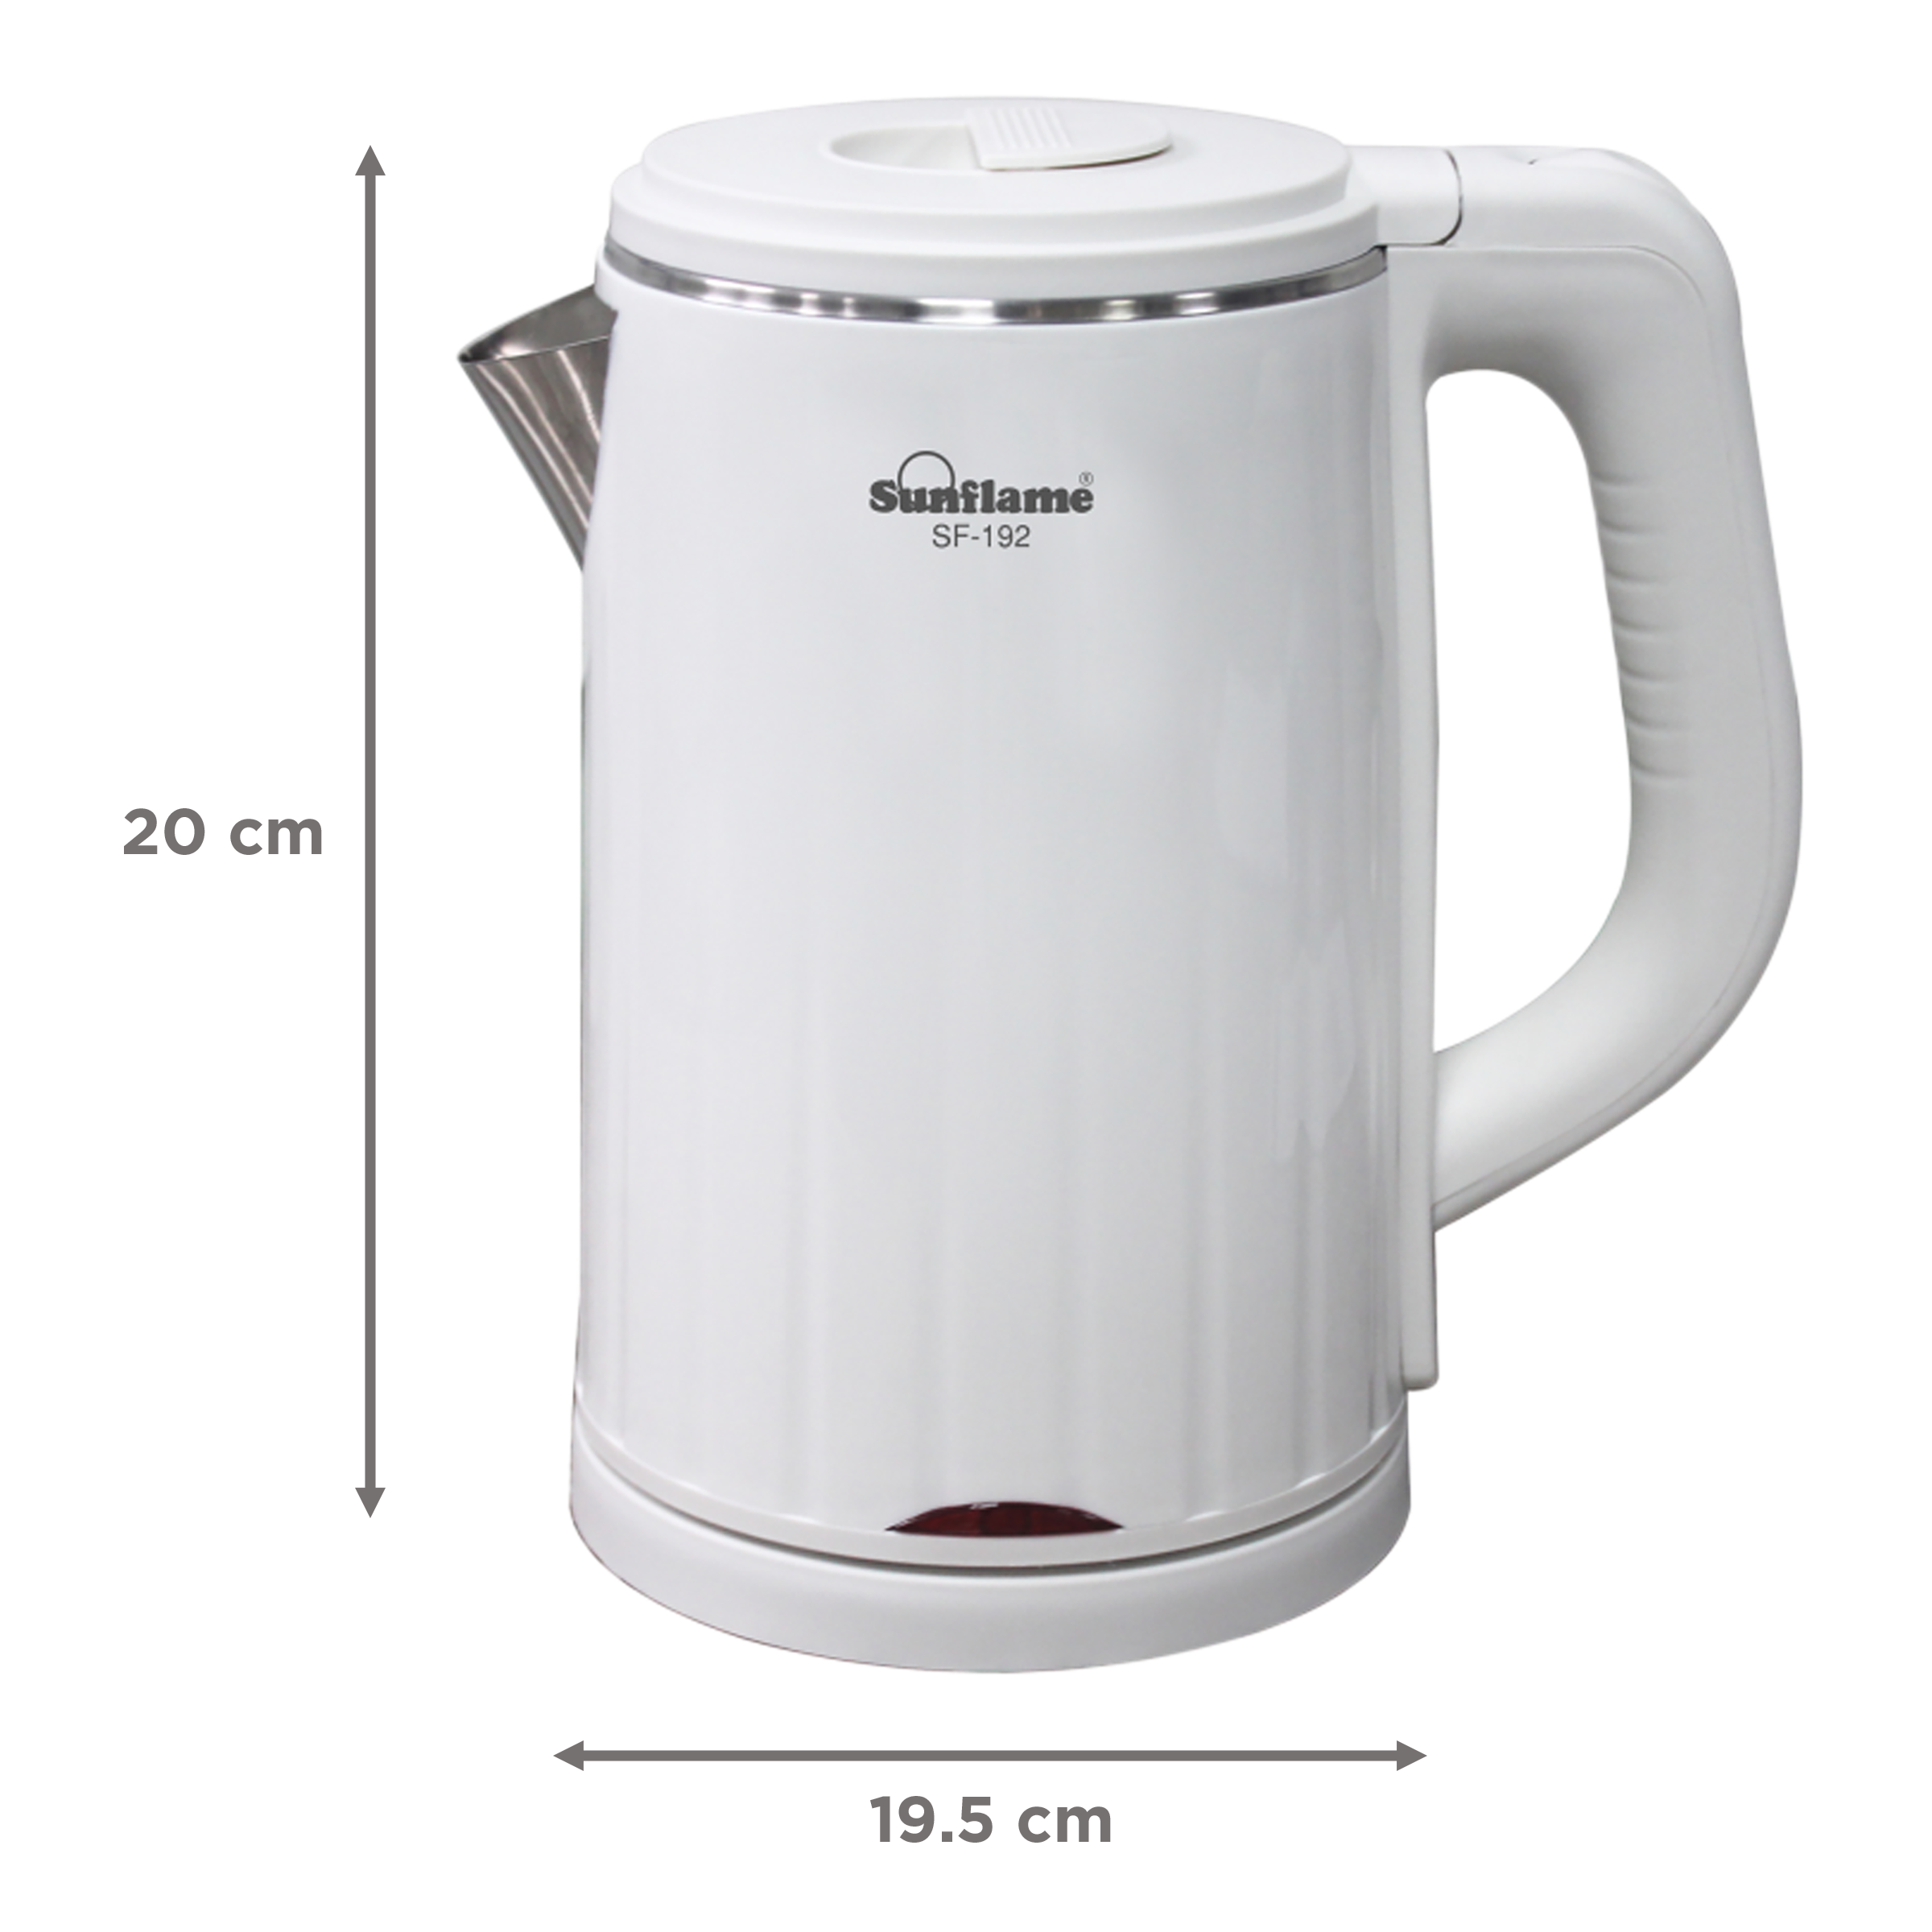 Sunflame 1.2L 1500 Watts Electric Kettle (Variable Temperature Control, SF-192, White)_4